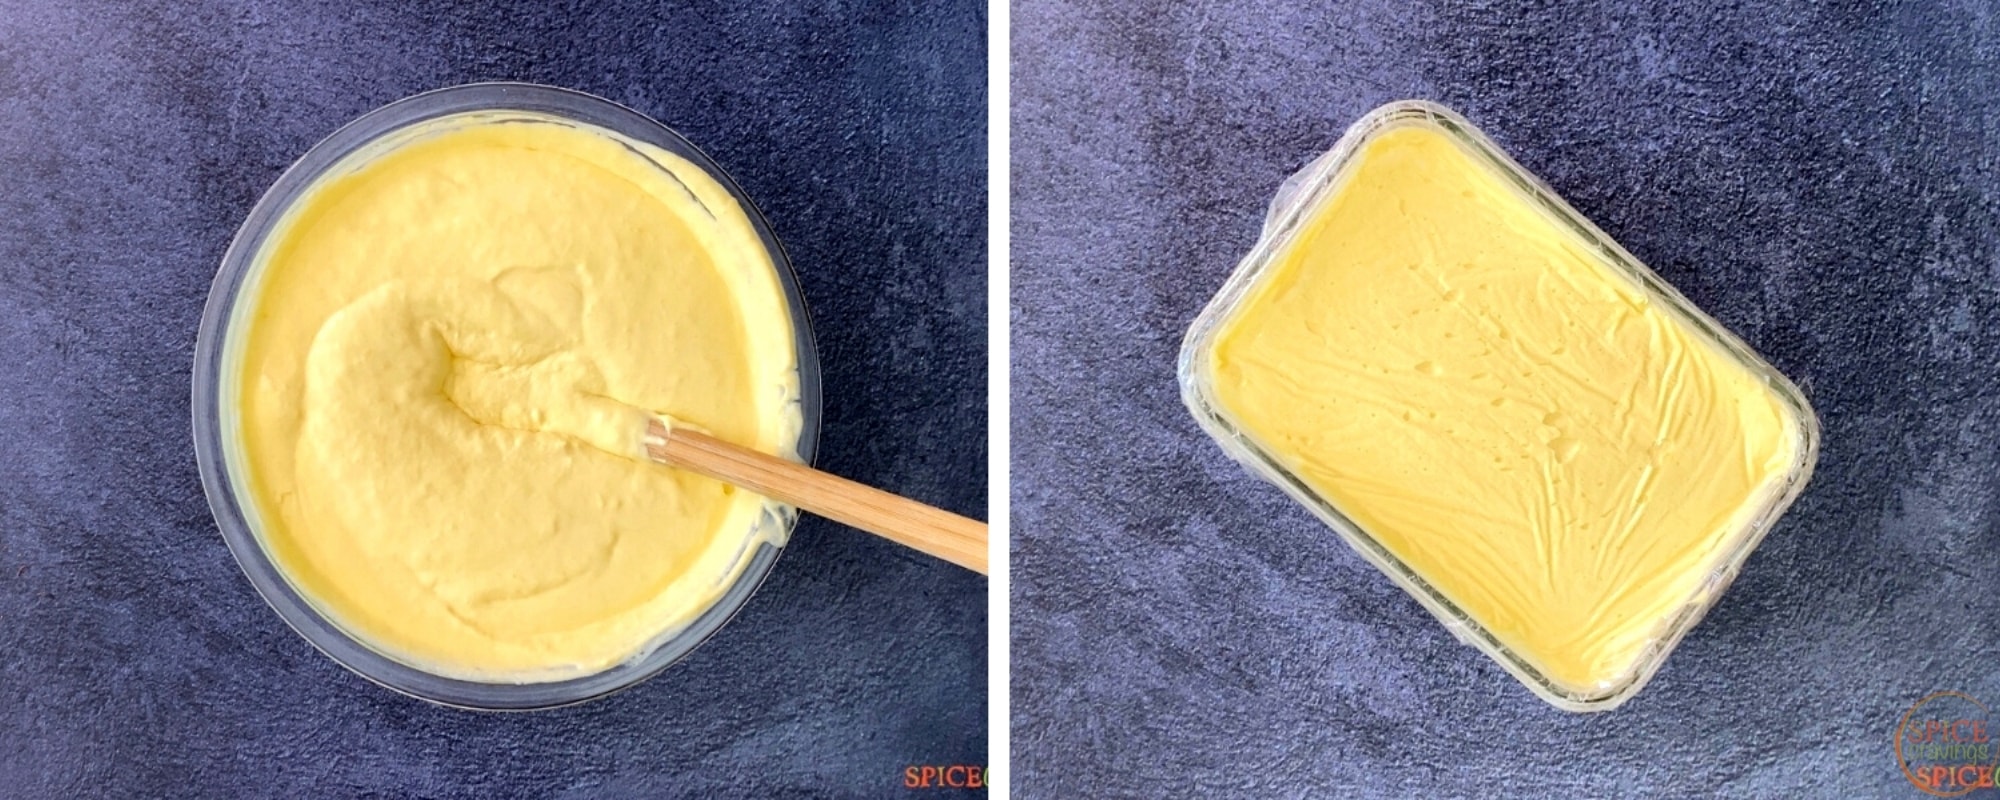 Mango ice cream mix in bowl on left, in pyrex dish on right